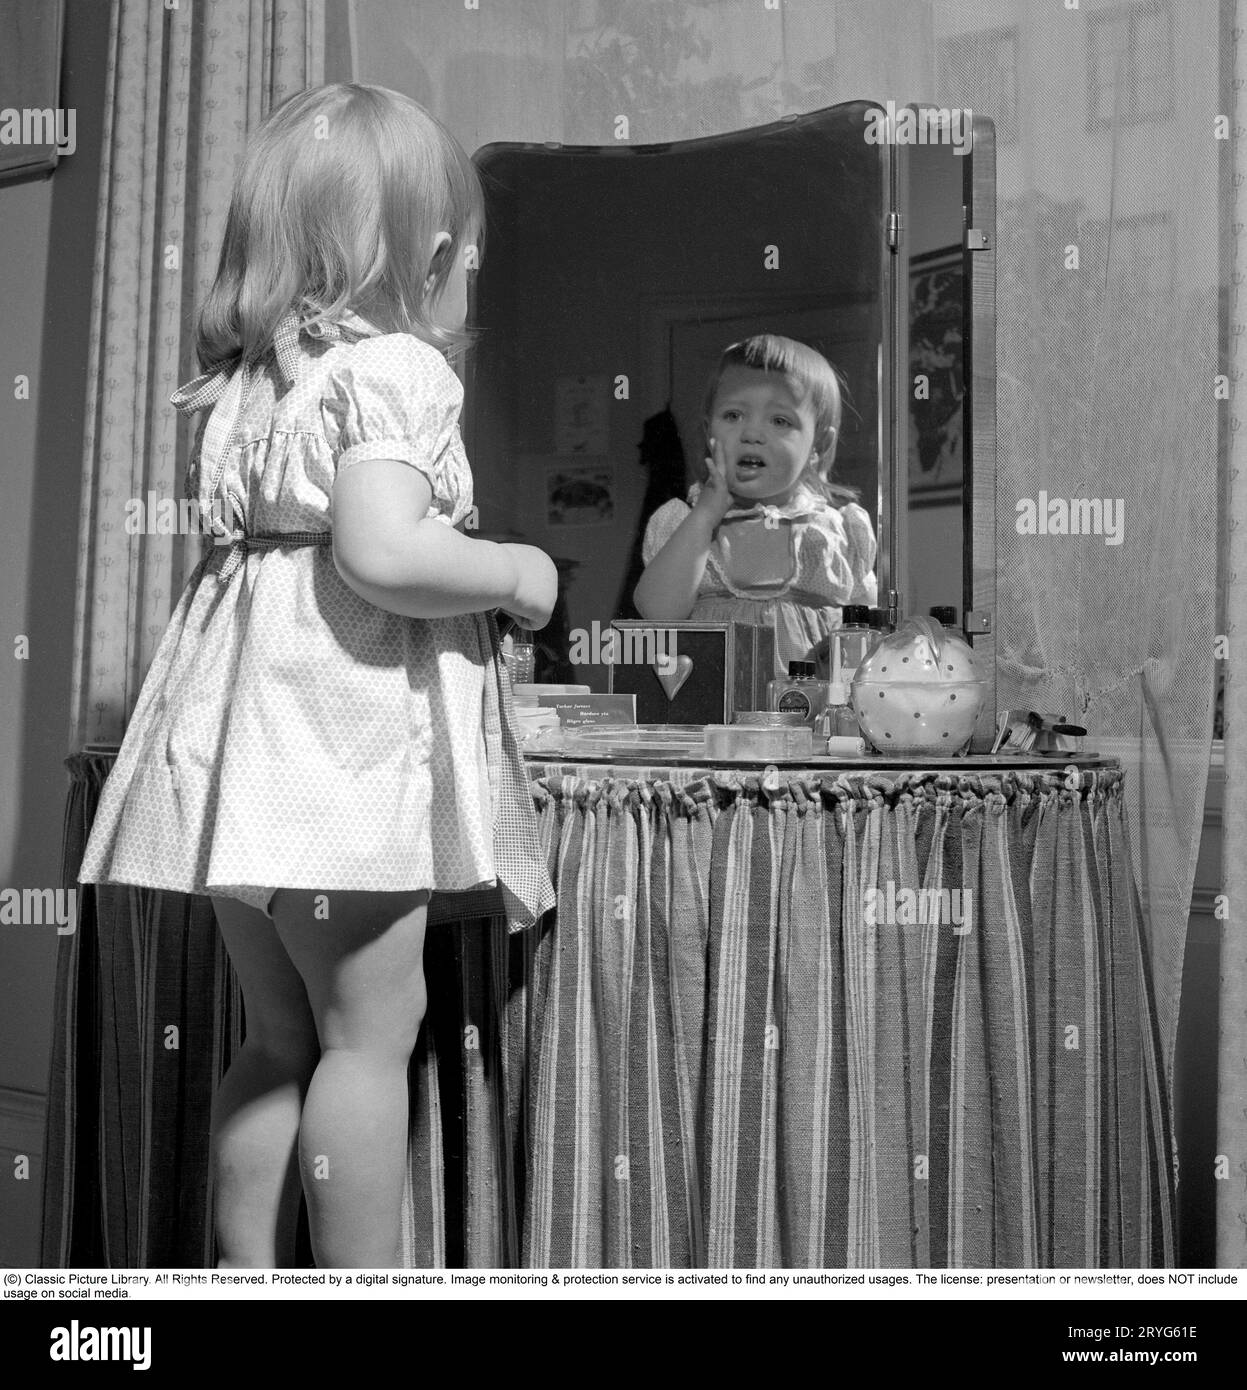 In the 1950s. A little girl is standing in front of her mothers makeup table and mirror and puts on some kind of beauty cream on her face, but does not look so happy. Sweden 1951 Conard ref 1708 Stock Photo